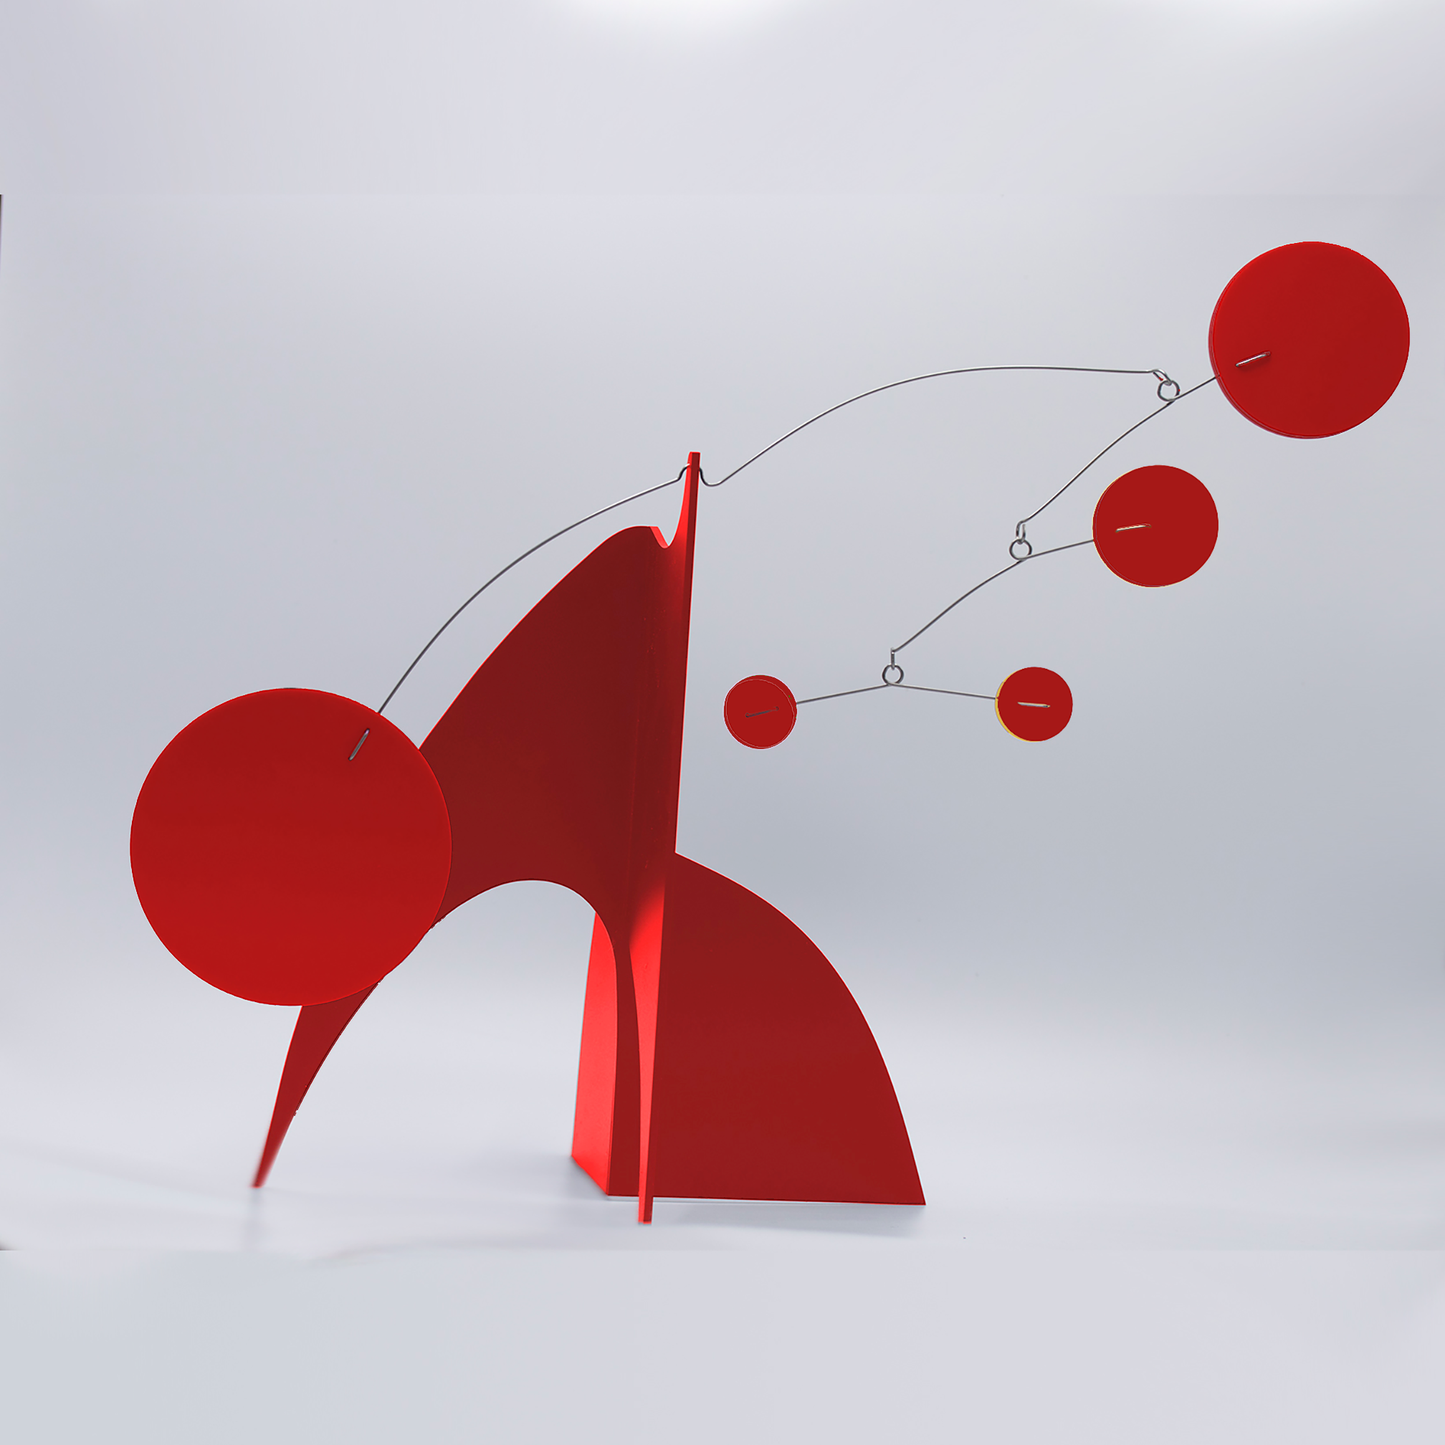 Beautiful Moderne Art Stabile in all red - mid century modern inspired abstract modern art - tabletop kinetic art sculpture mobiles hand made with glossy plexiglass acrylic in Los Angeles by Debra Ann of AtomicMobiles.com